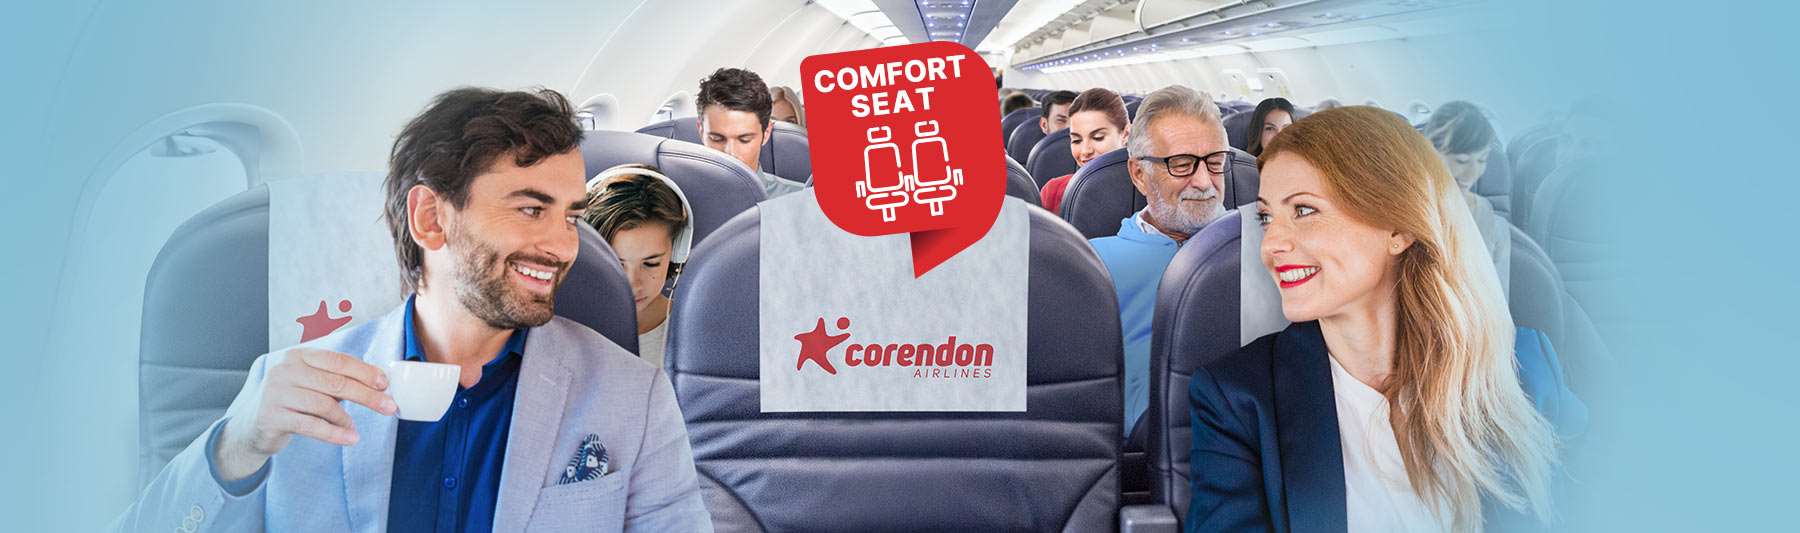 Enjoy the convenience ensured by our 'Comfort seats'